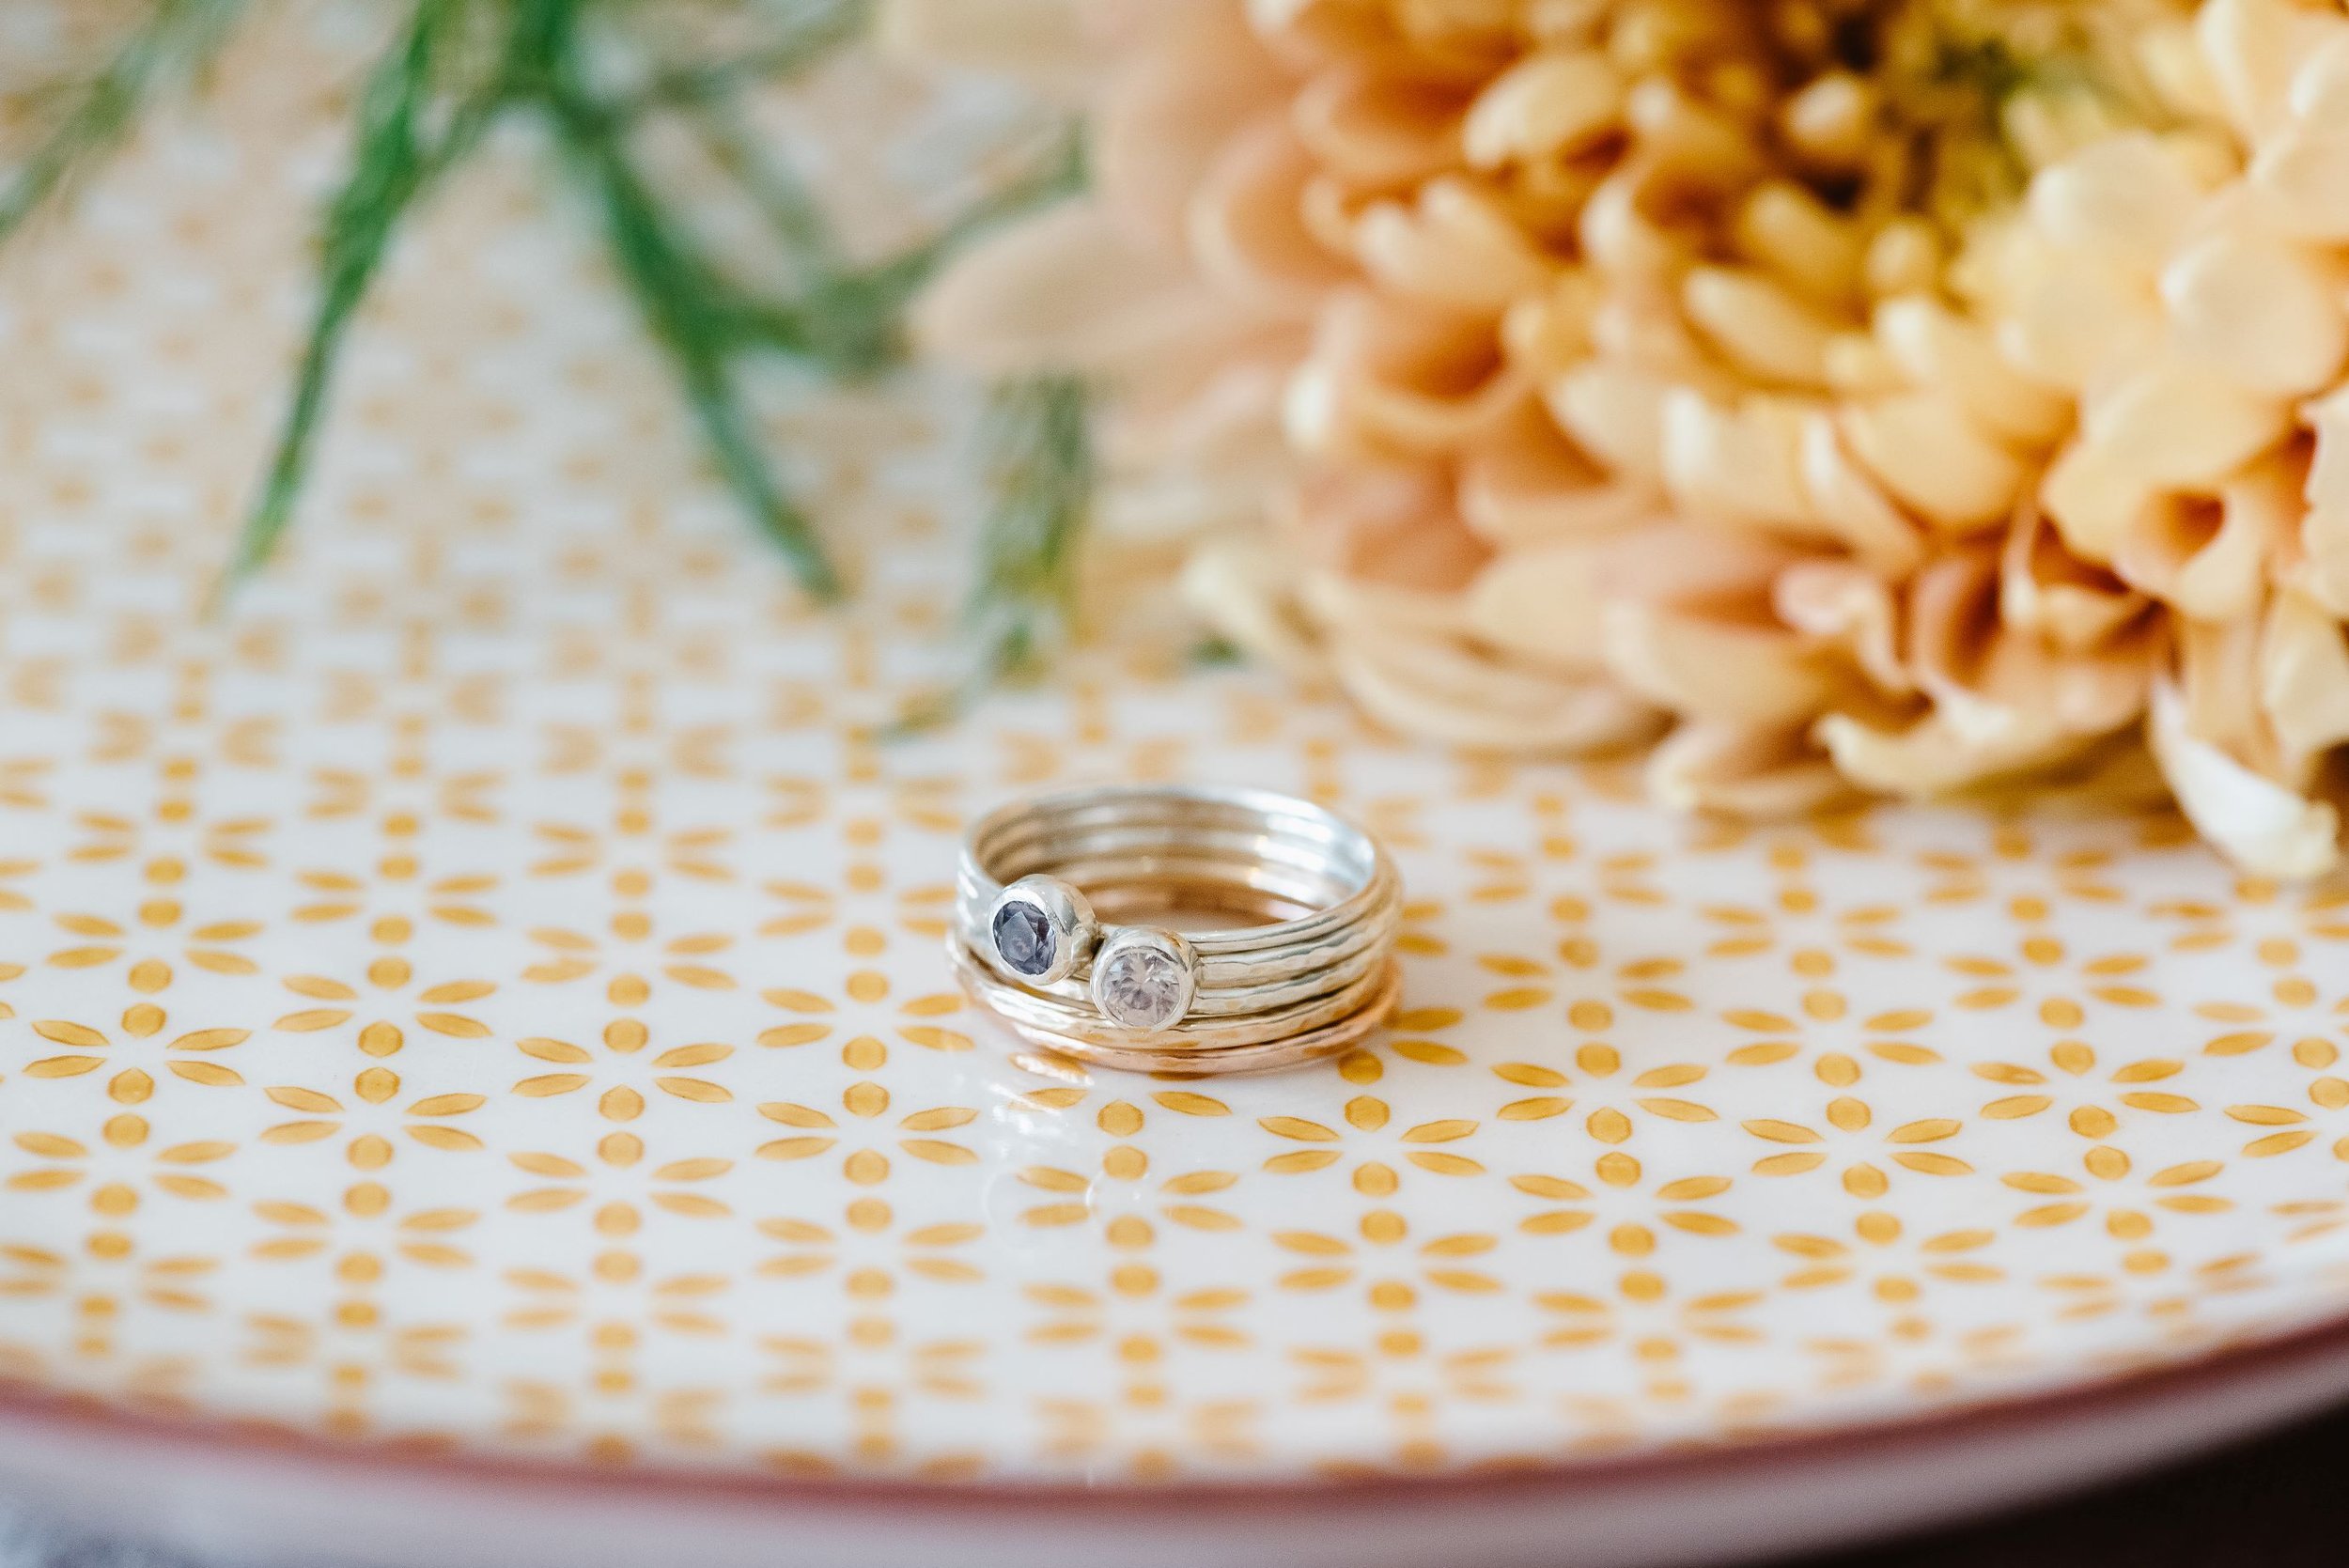  Ethically sourced stones set into single silver bands layered to create your perfect engagement ring look.   Photo by: Fiona Kelly 